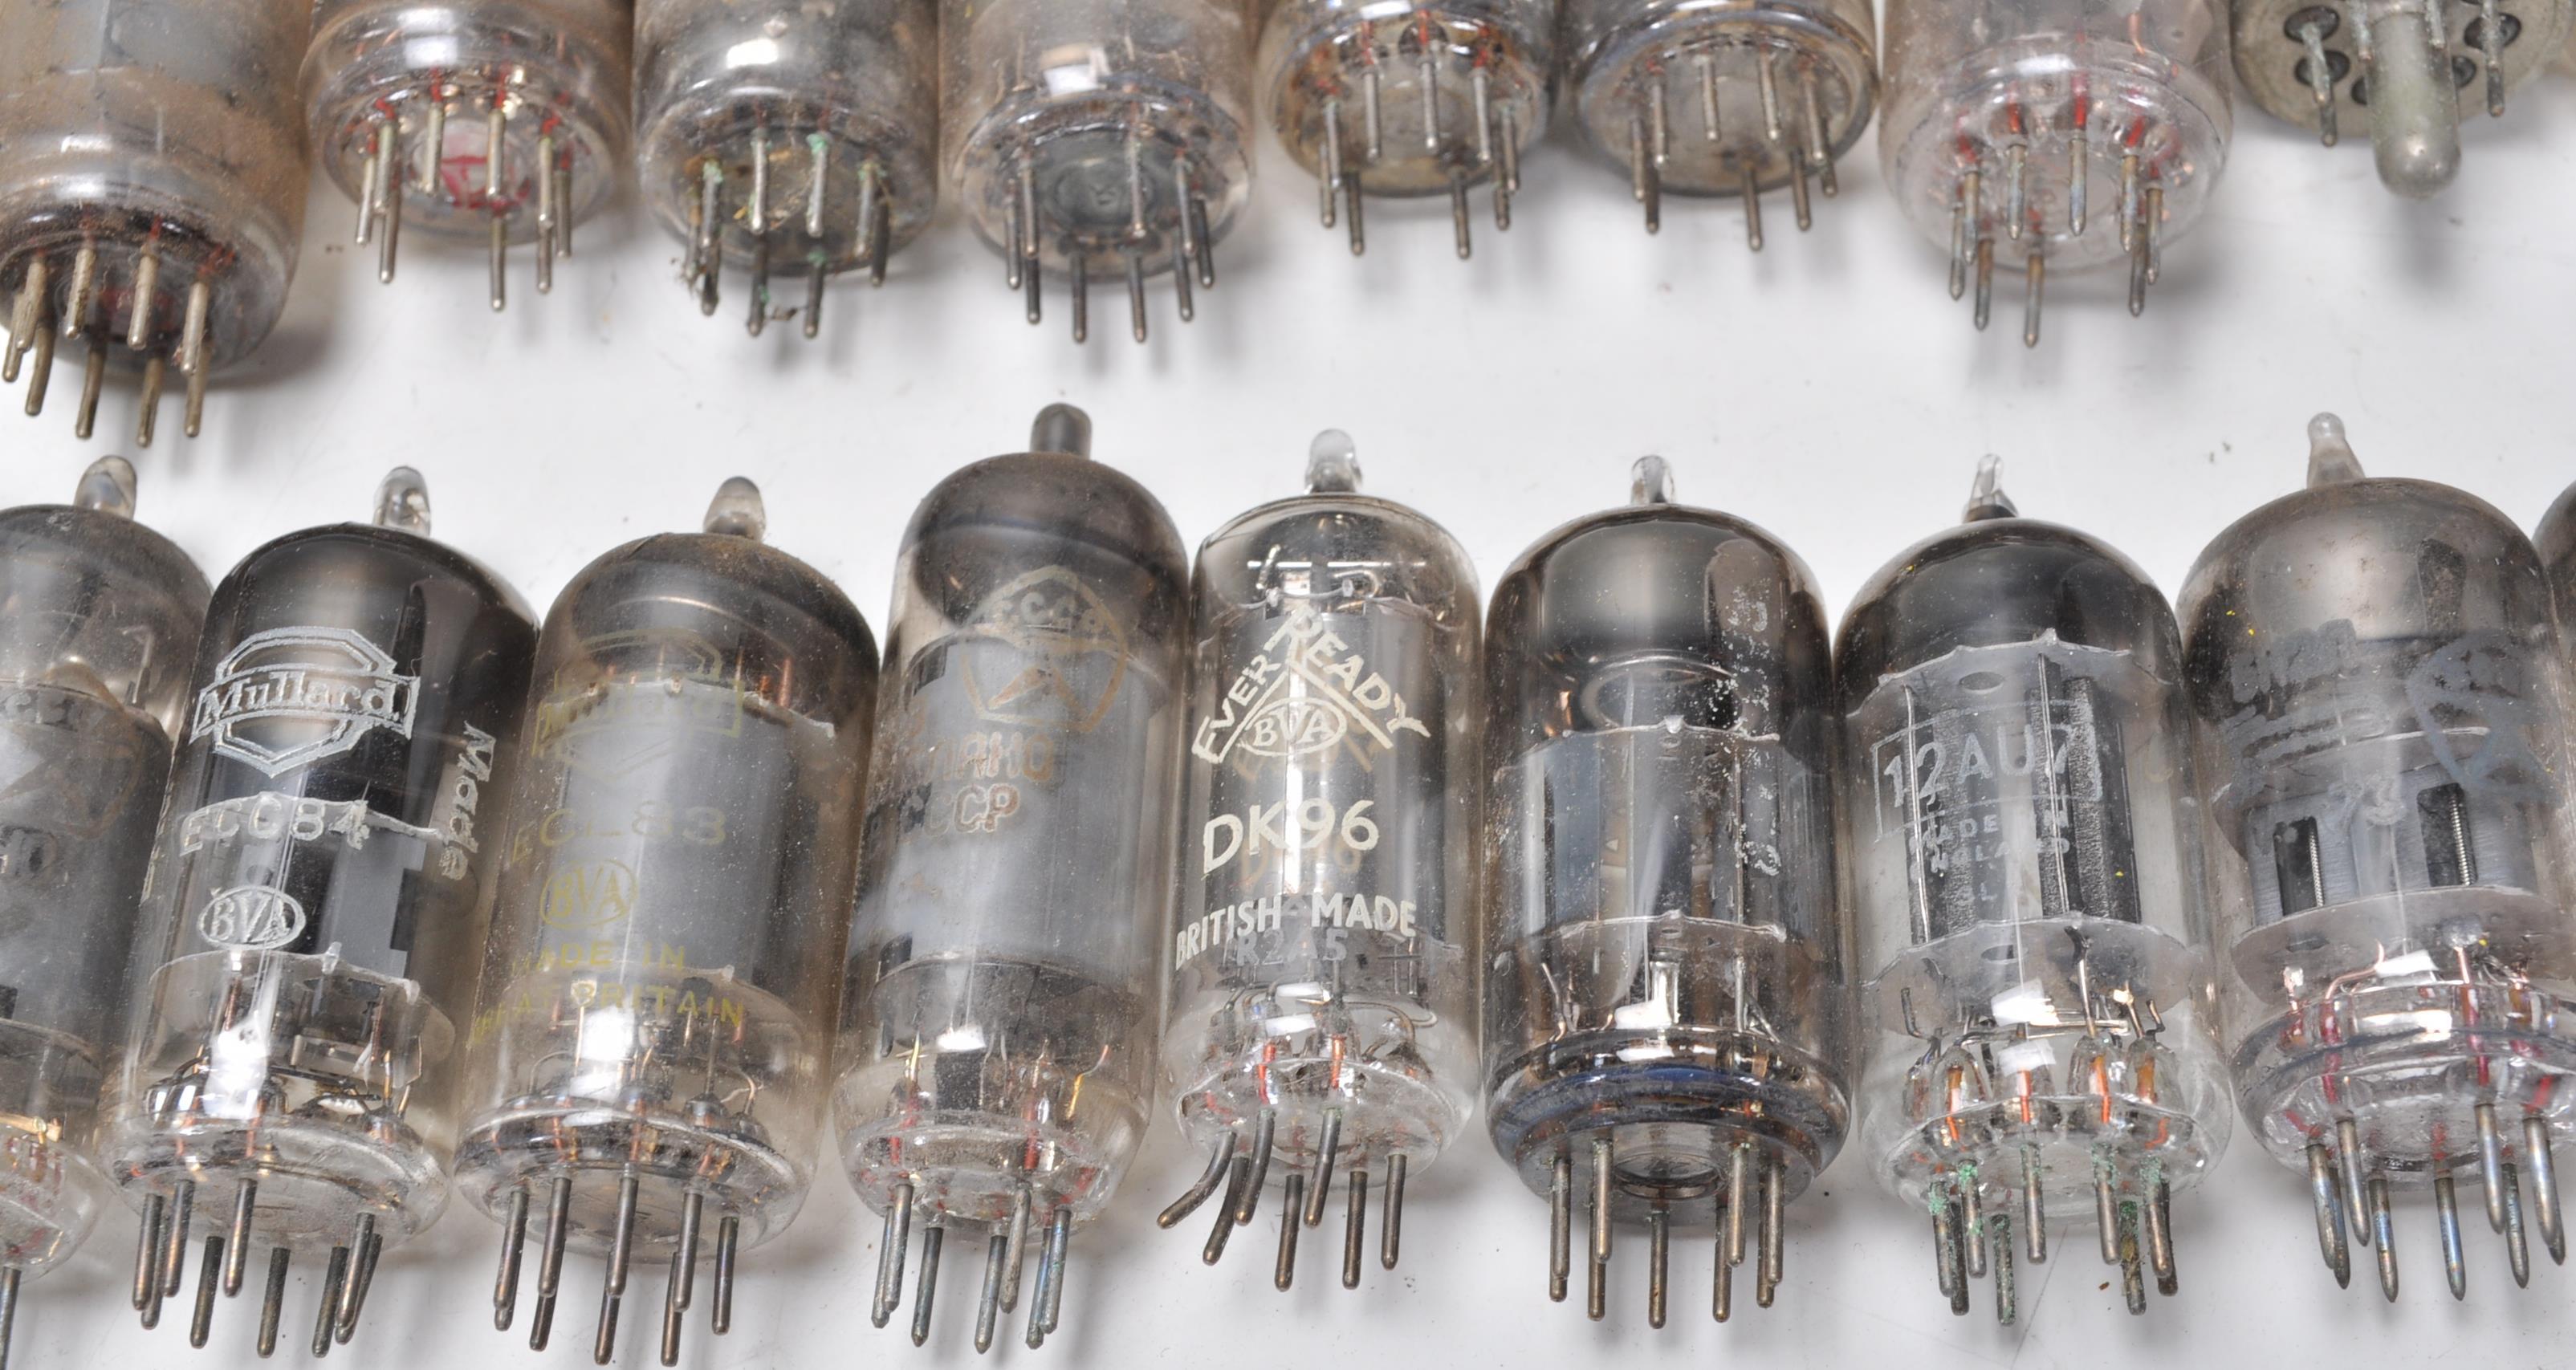 A collection of vintage mixed radio valves to include EC83, EZ81, Ediswate UCH42, Mullard EZ81 - Image 4 of 21